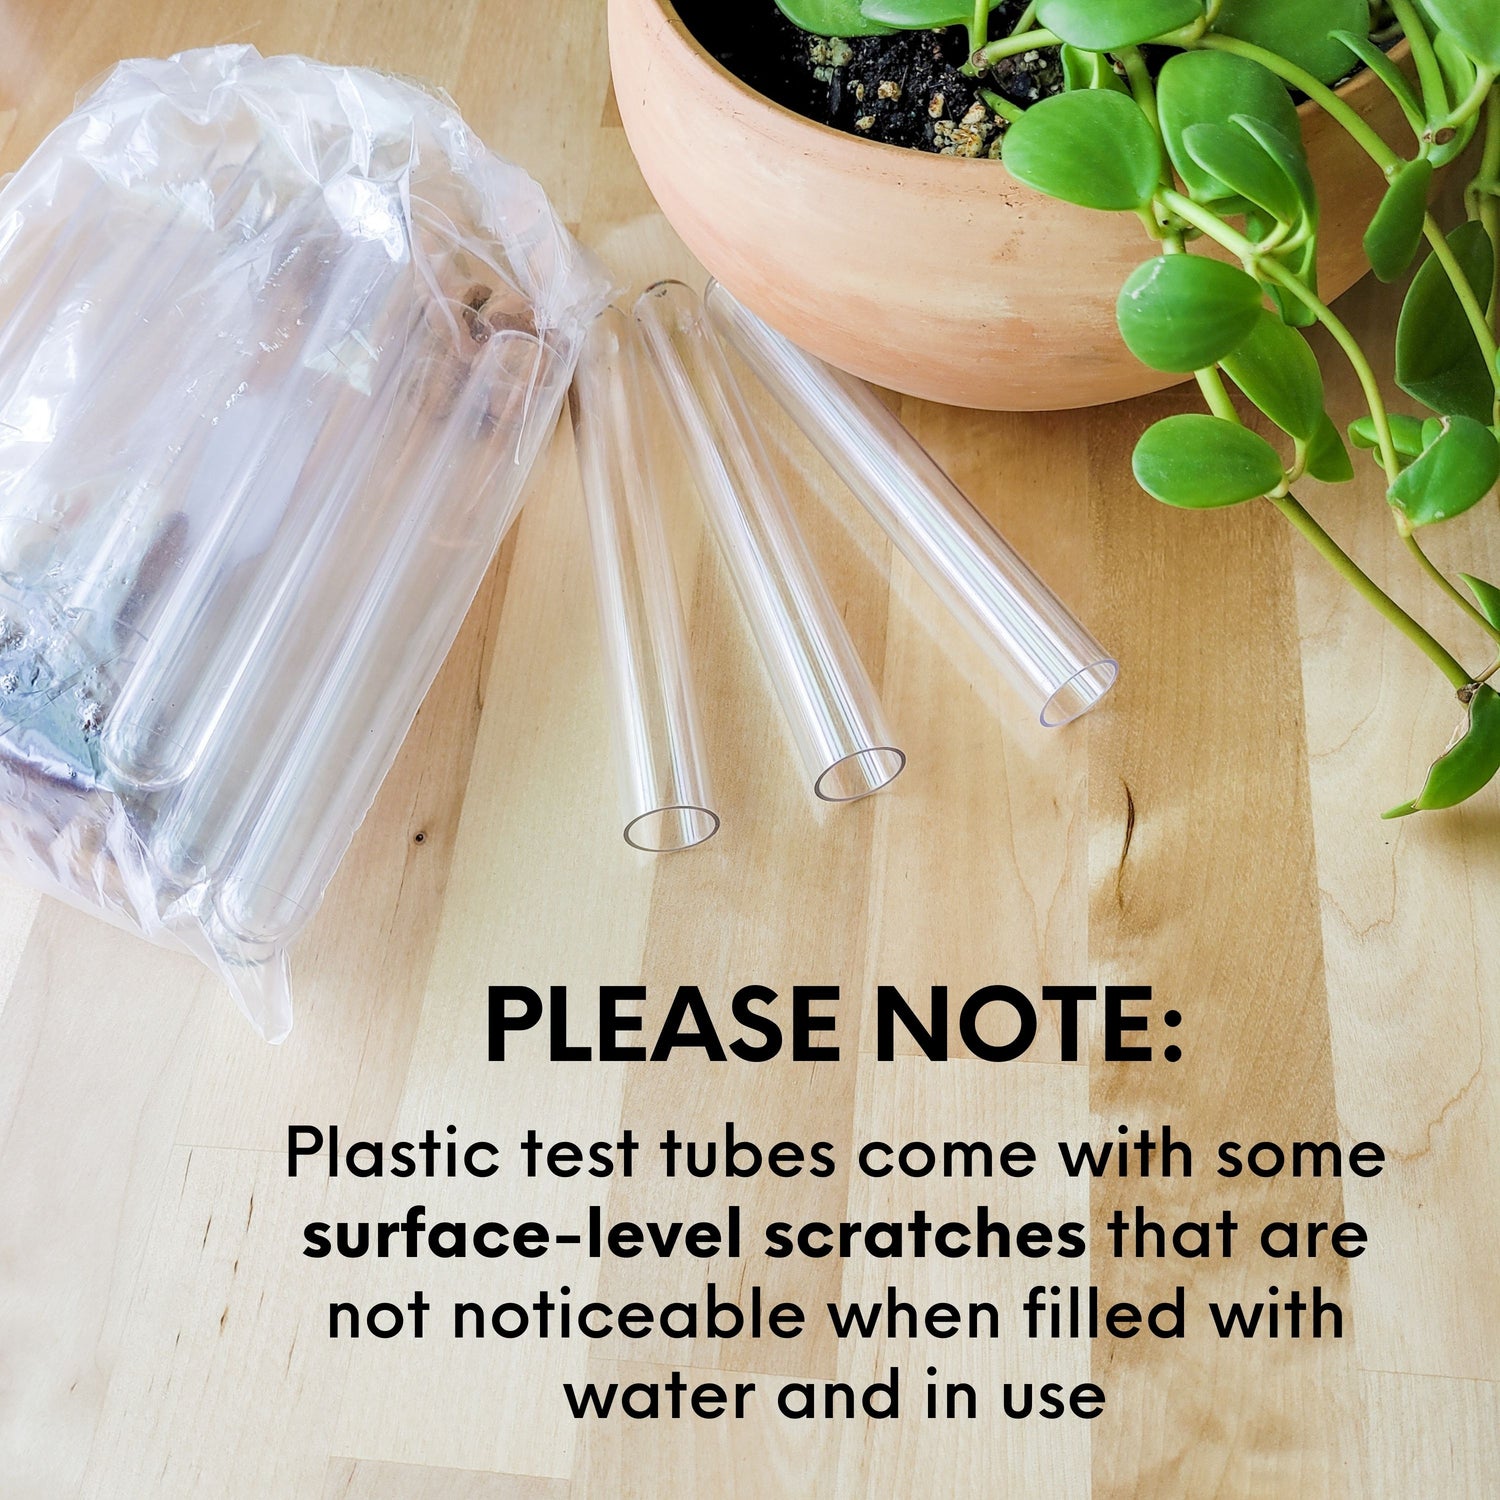 Photo of plastic test tubes on a wooden surface with a vining plant. Text overlay notes that tubes come with surface level scratches that are not noticeable when item is in use.